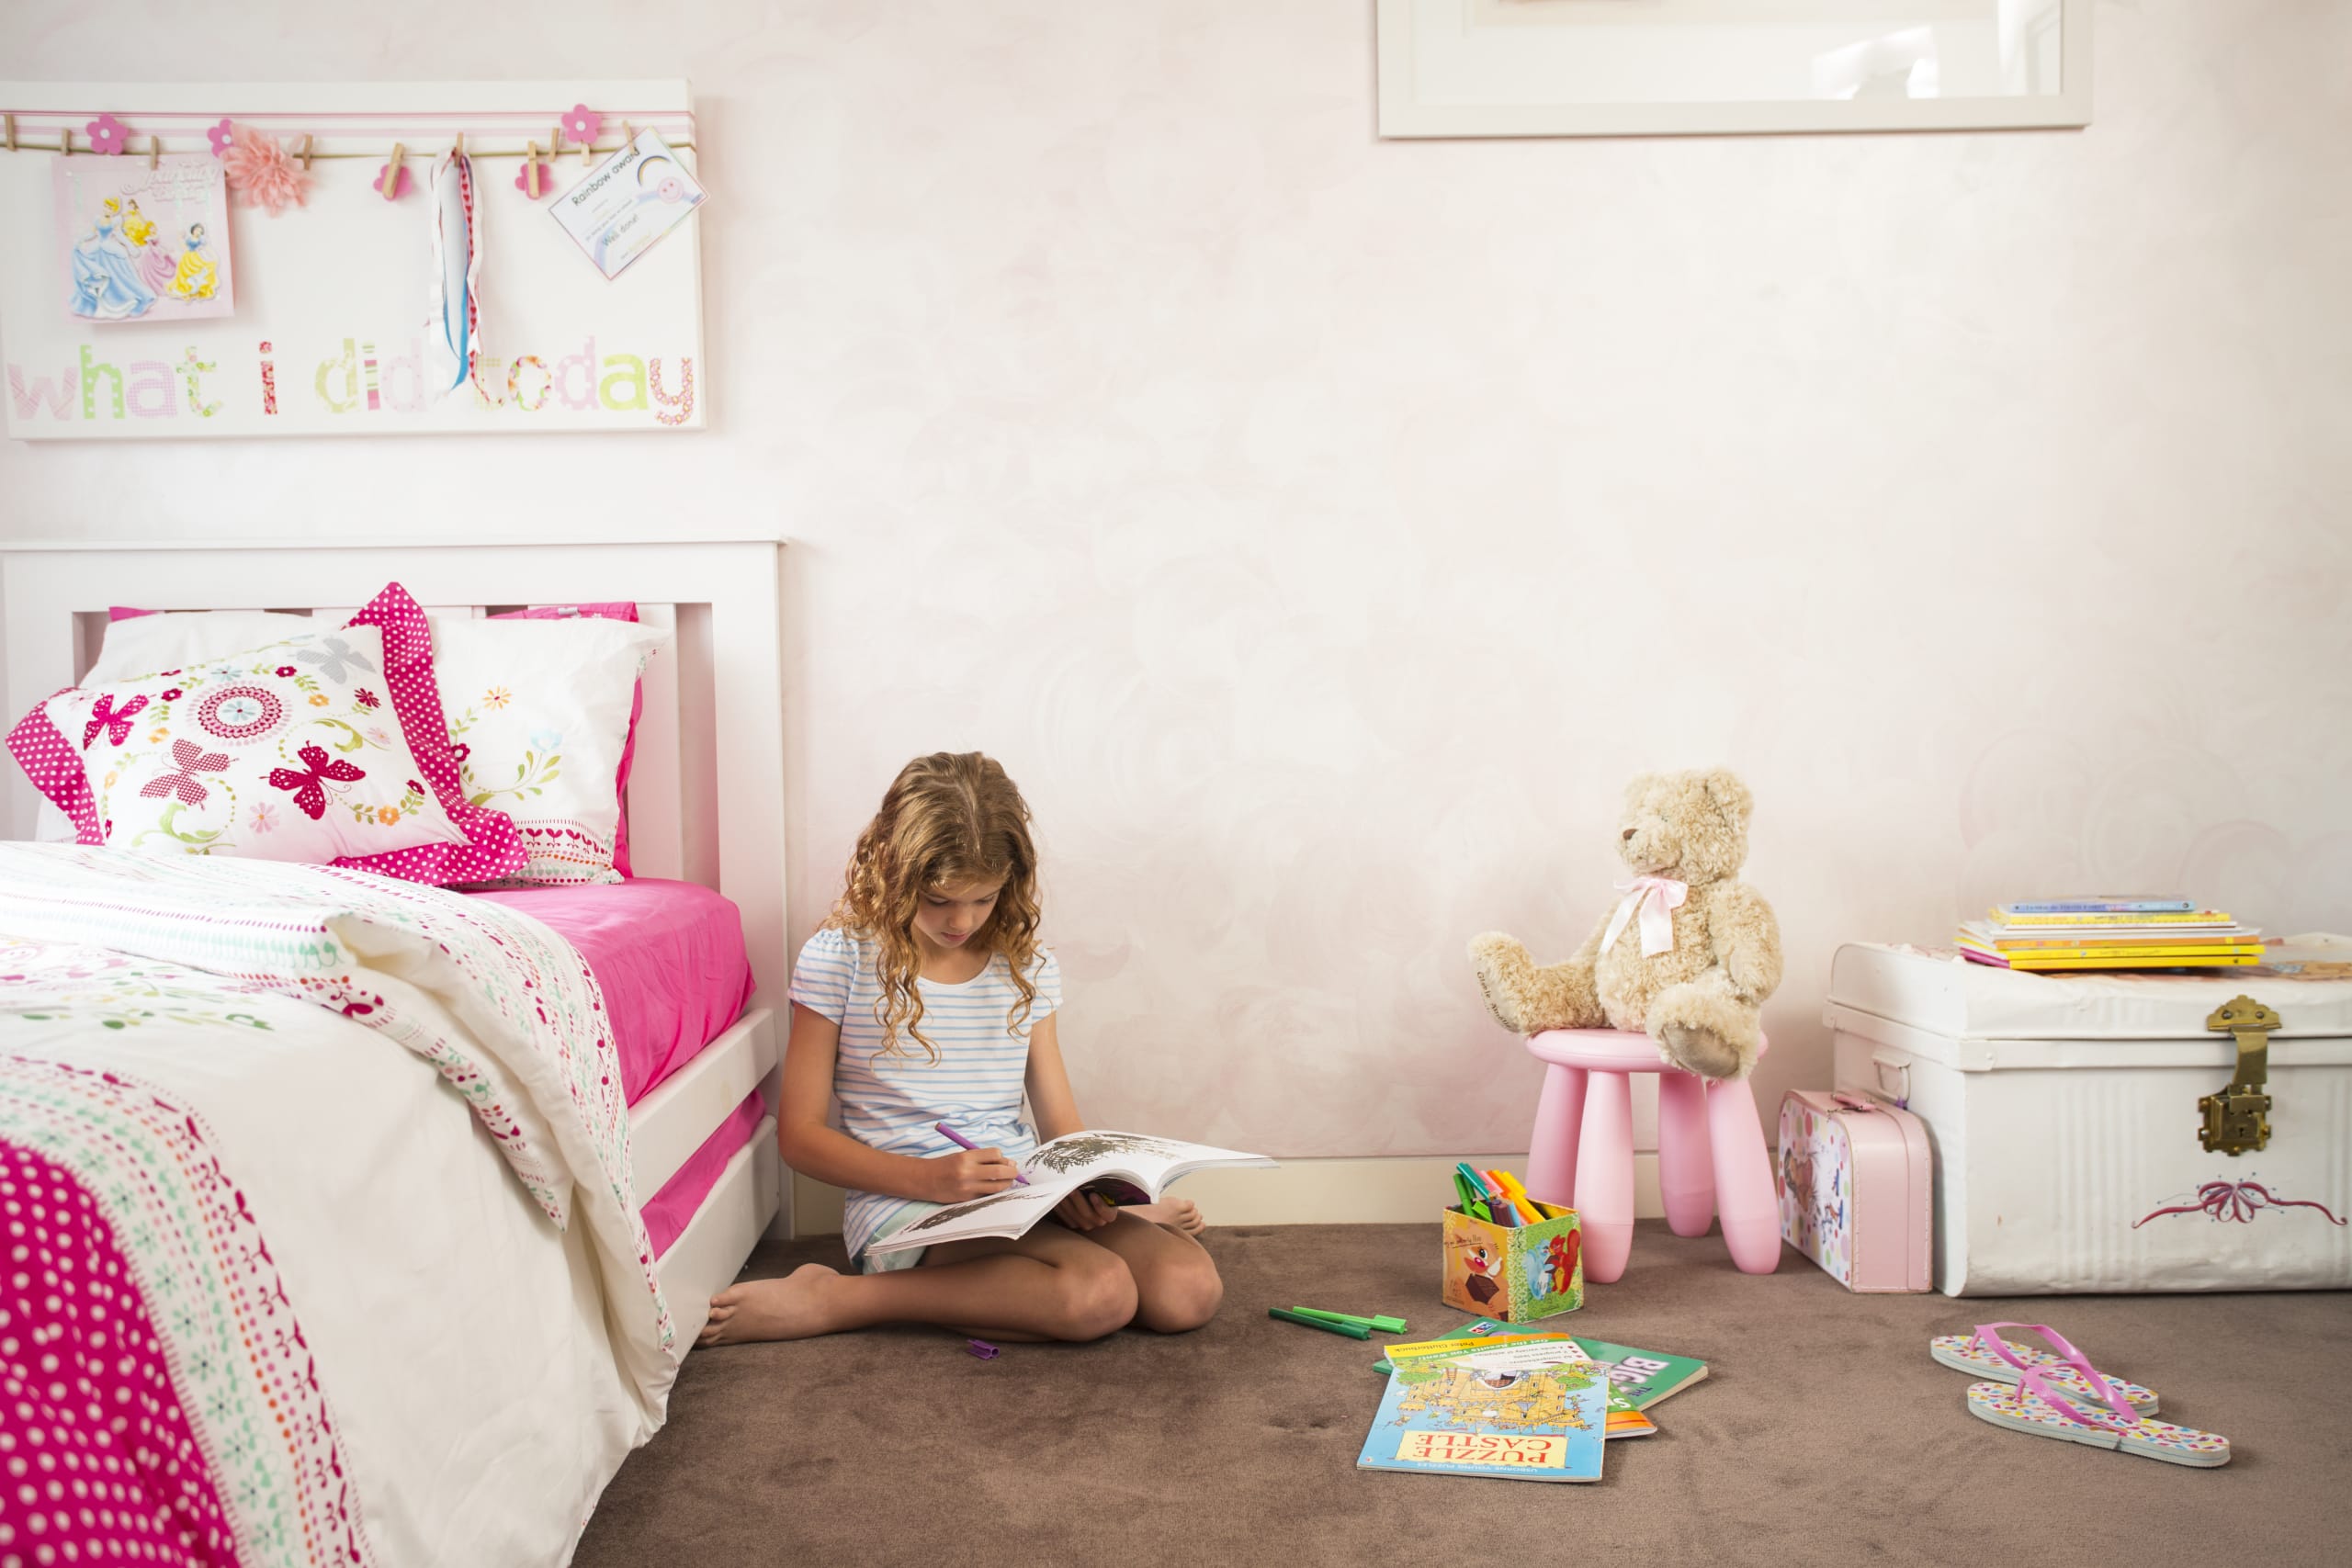 6 easy tips to promote sleep in your kid’s bedroom